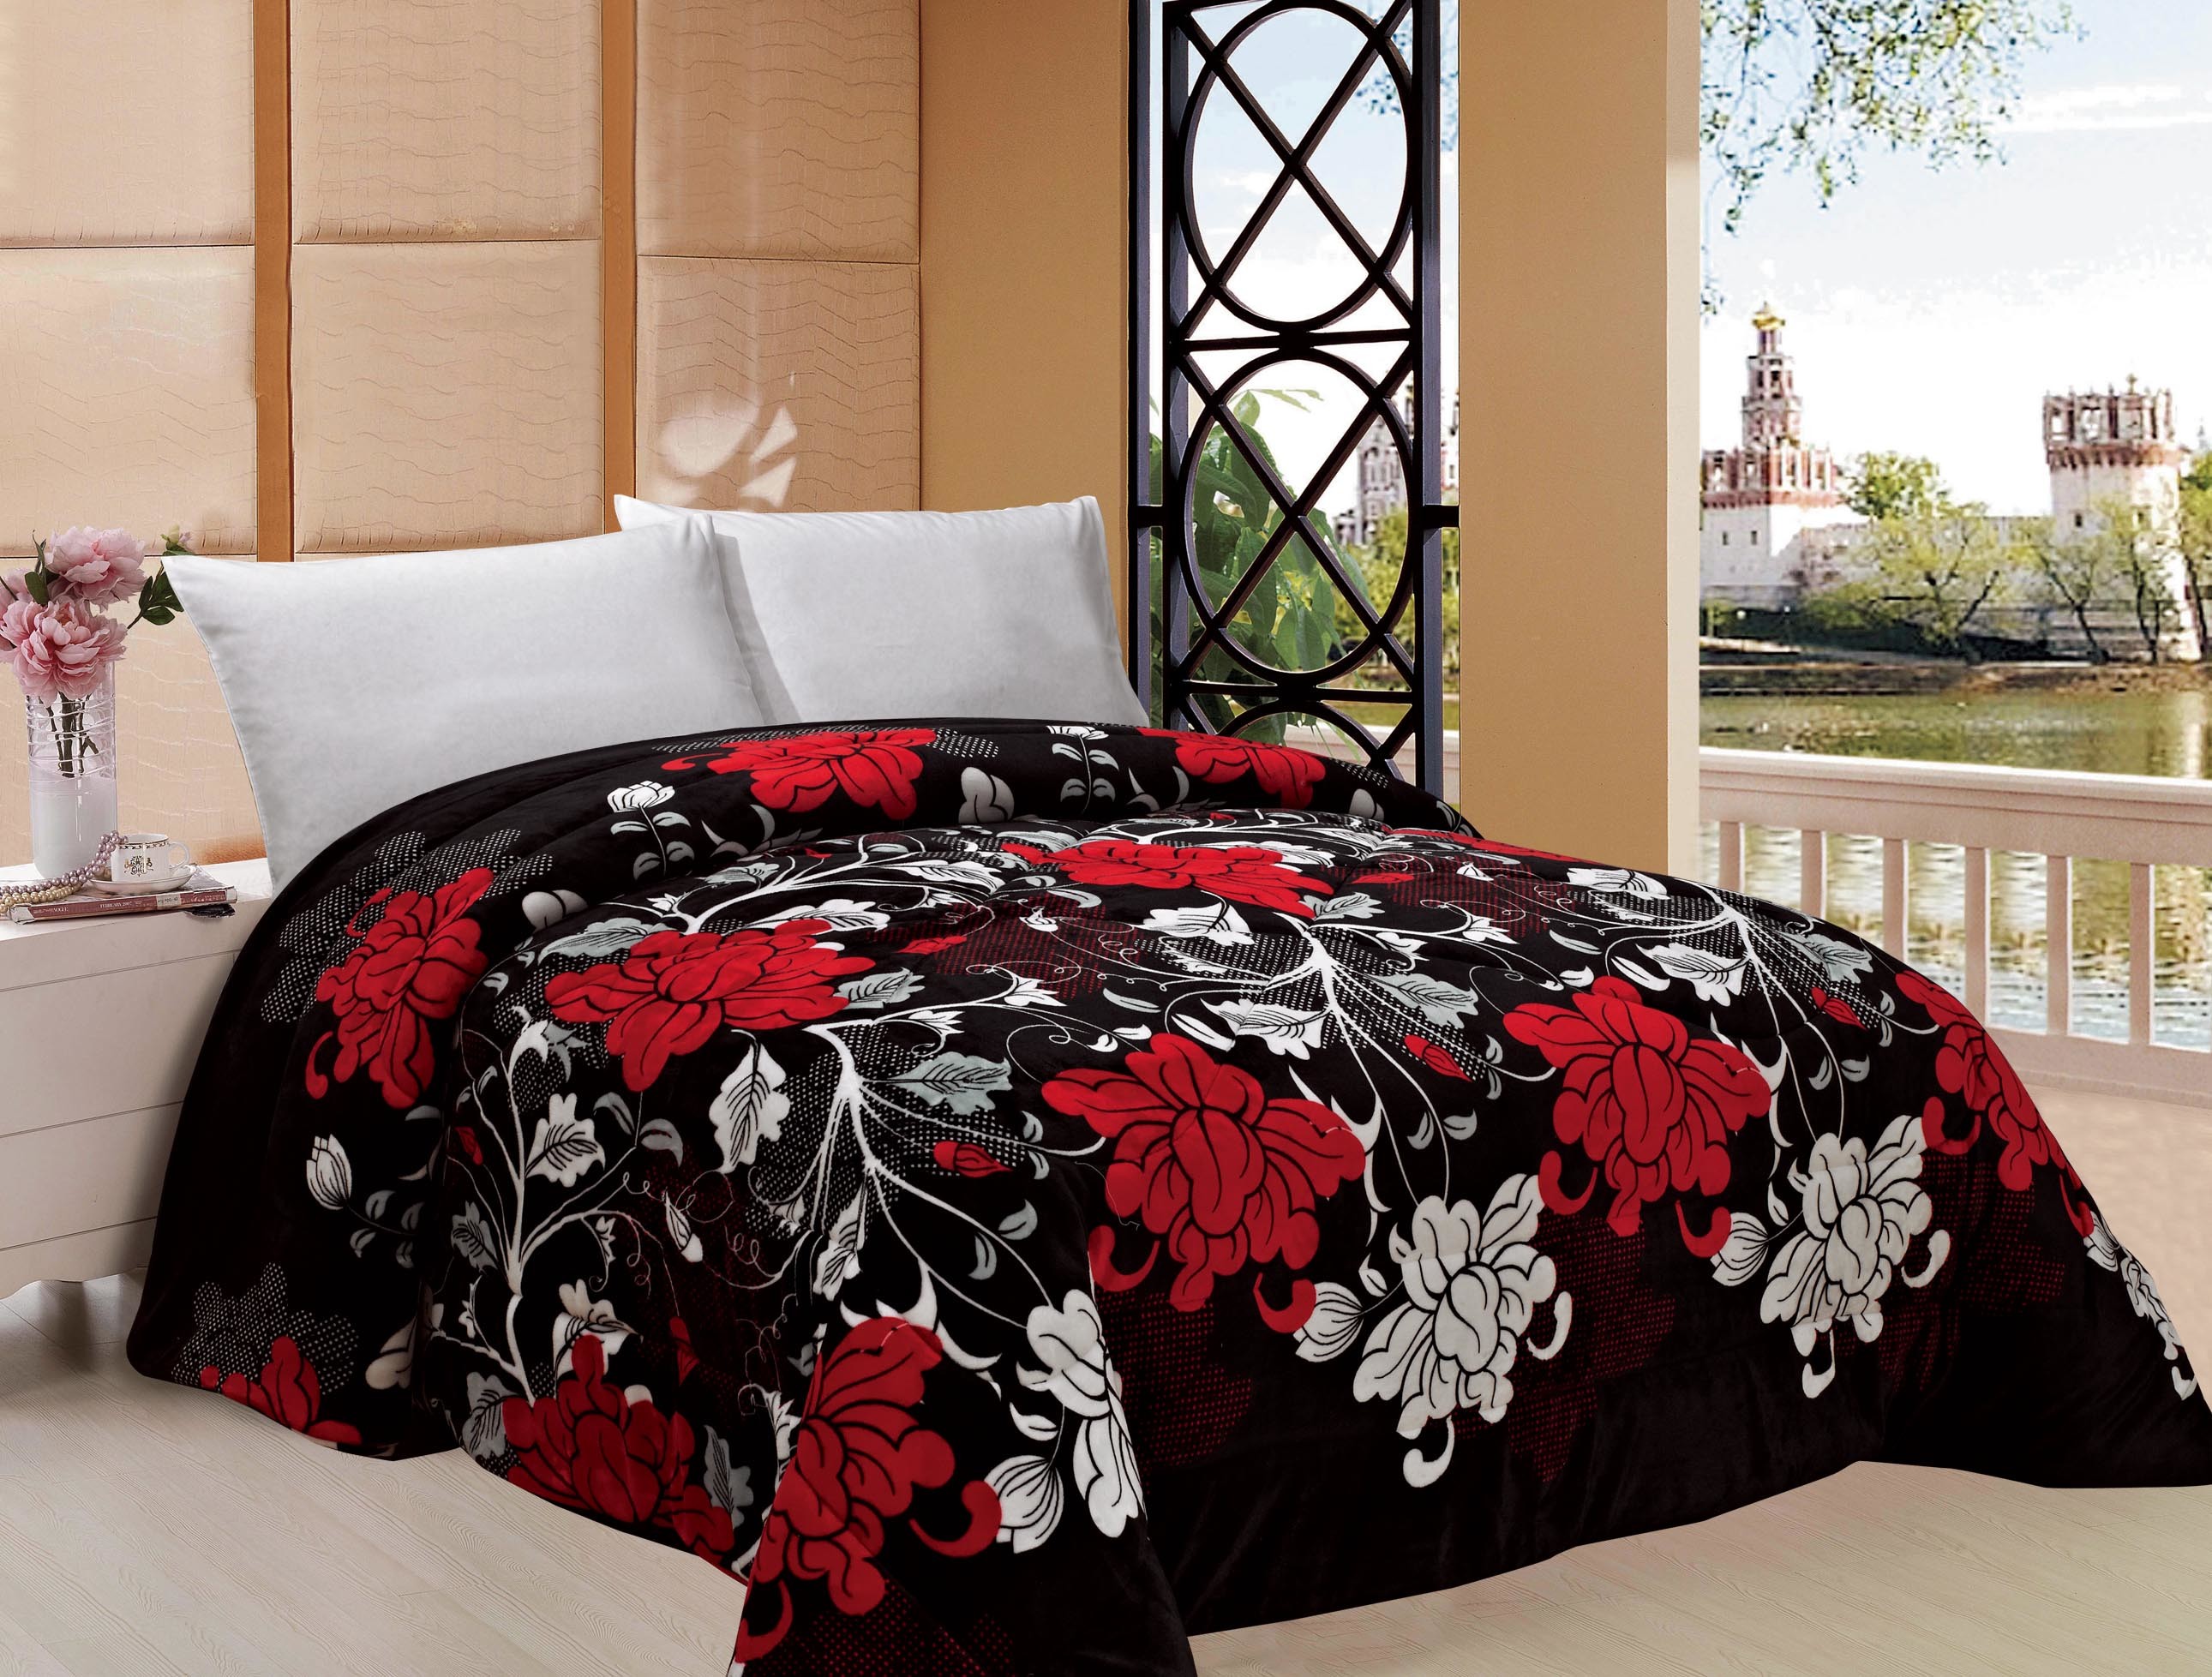 Best Big Flower Pattern Warm Bed Sheets For Winter , Printed Flannel Winter Bedding Sets wholesale